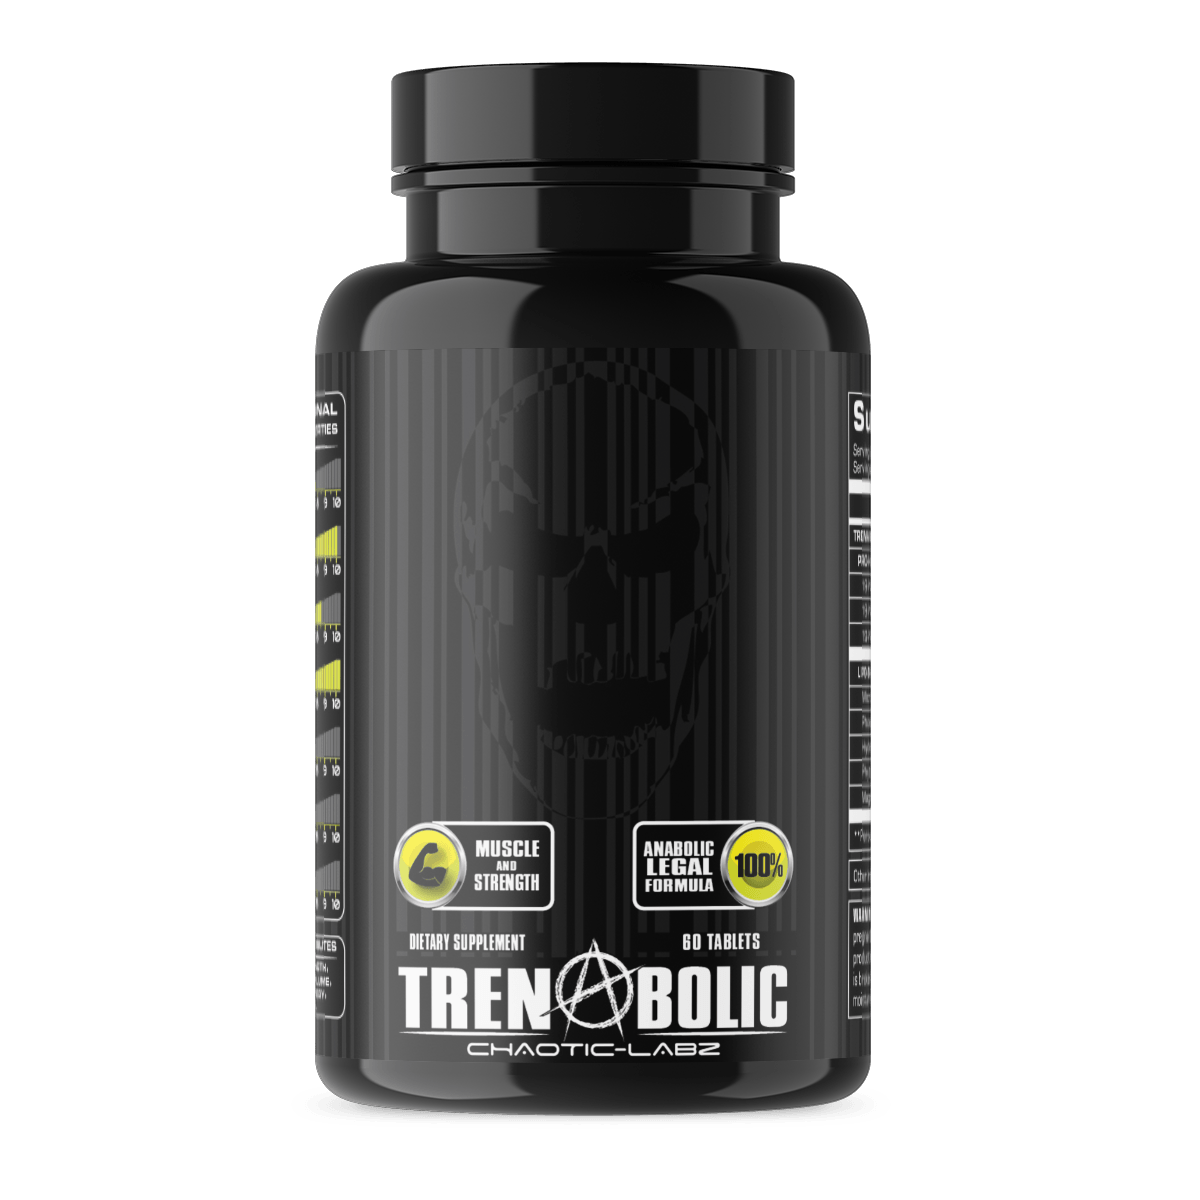 Trenabolic, 60 pcs, Chaotic Labz. Special supplements. 